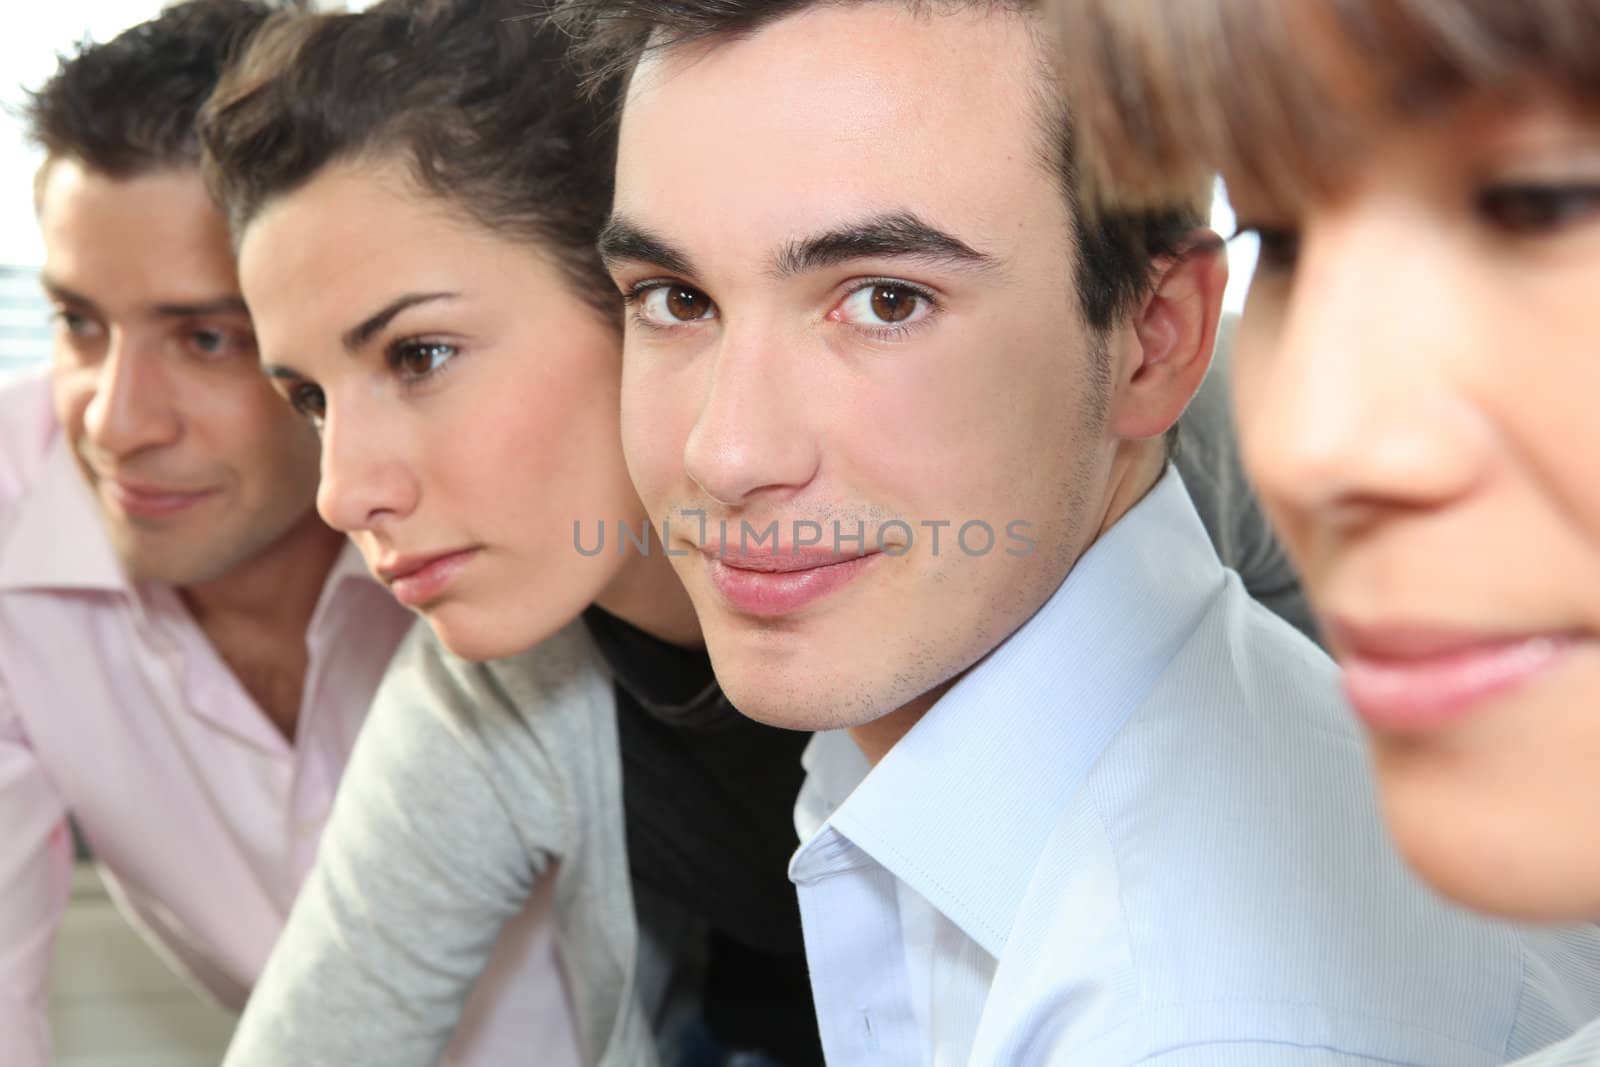 Closeup of people's faces in an office by phovoir